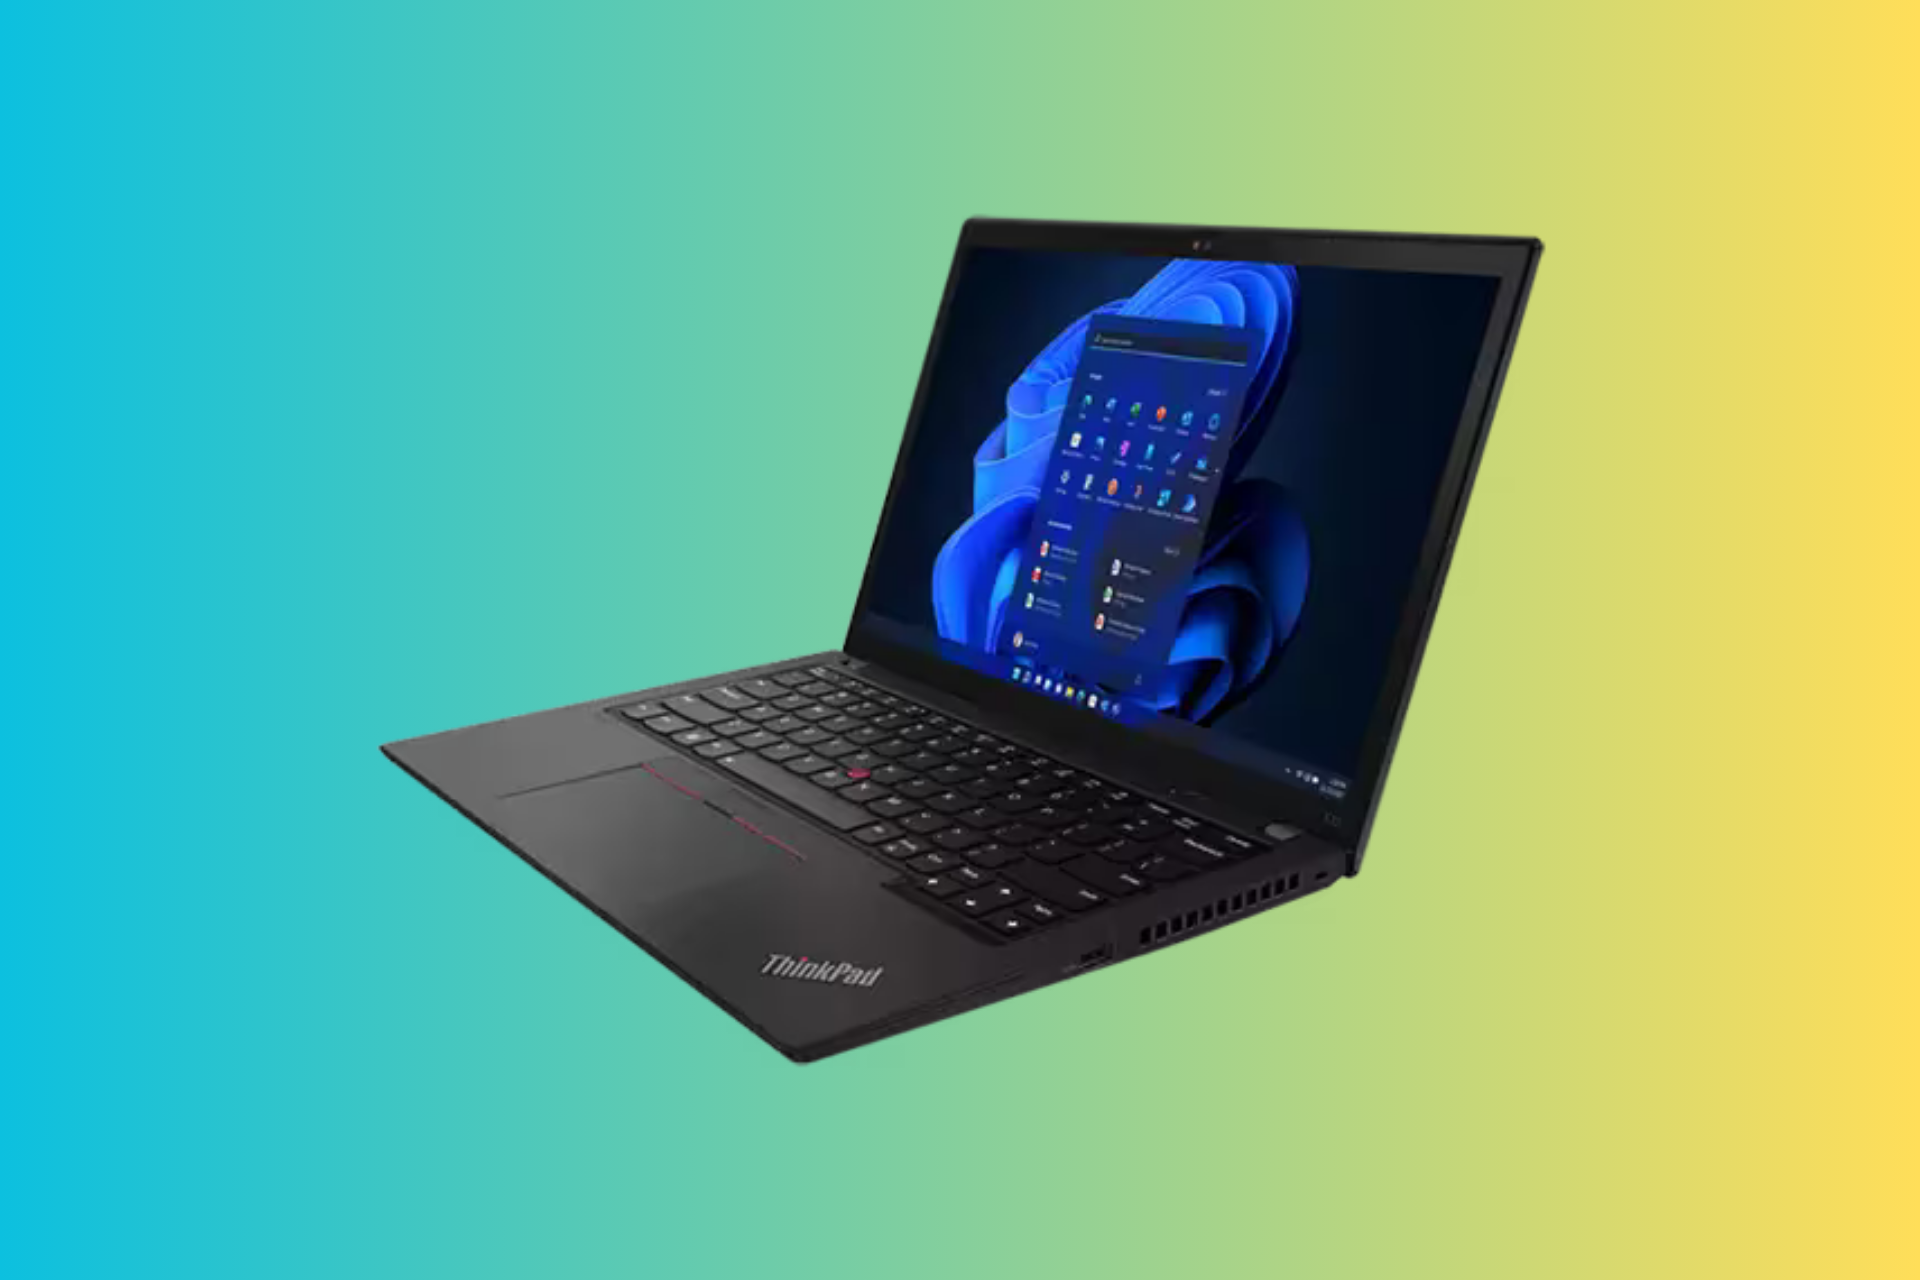 Limited time offer:  Lenovo ThinkPad X13 Gen 3 with AMD Ryzen 7 Pro 6850U is now available for  $849